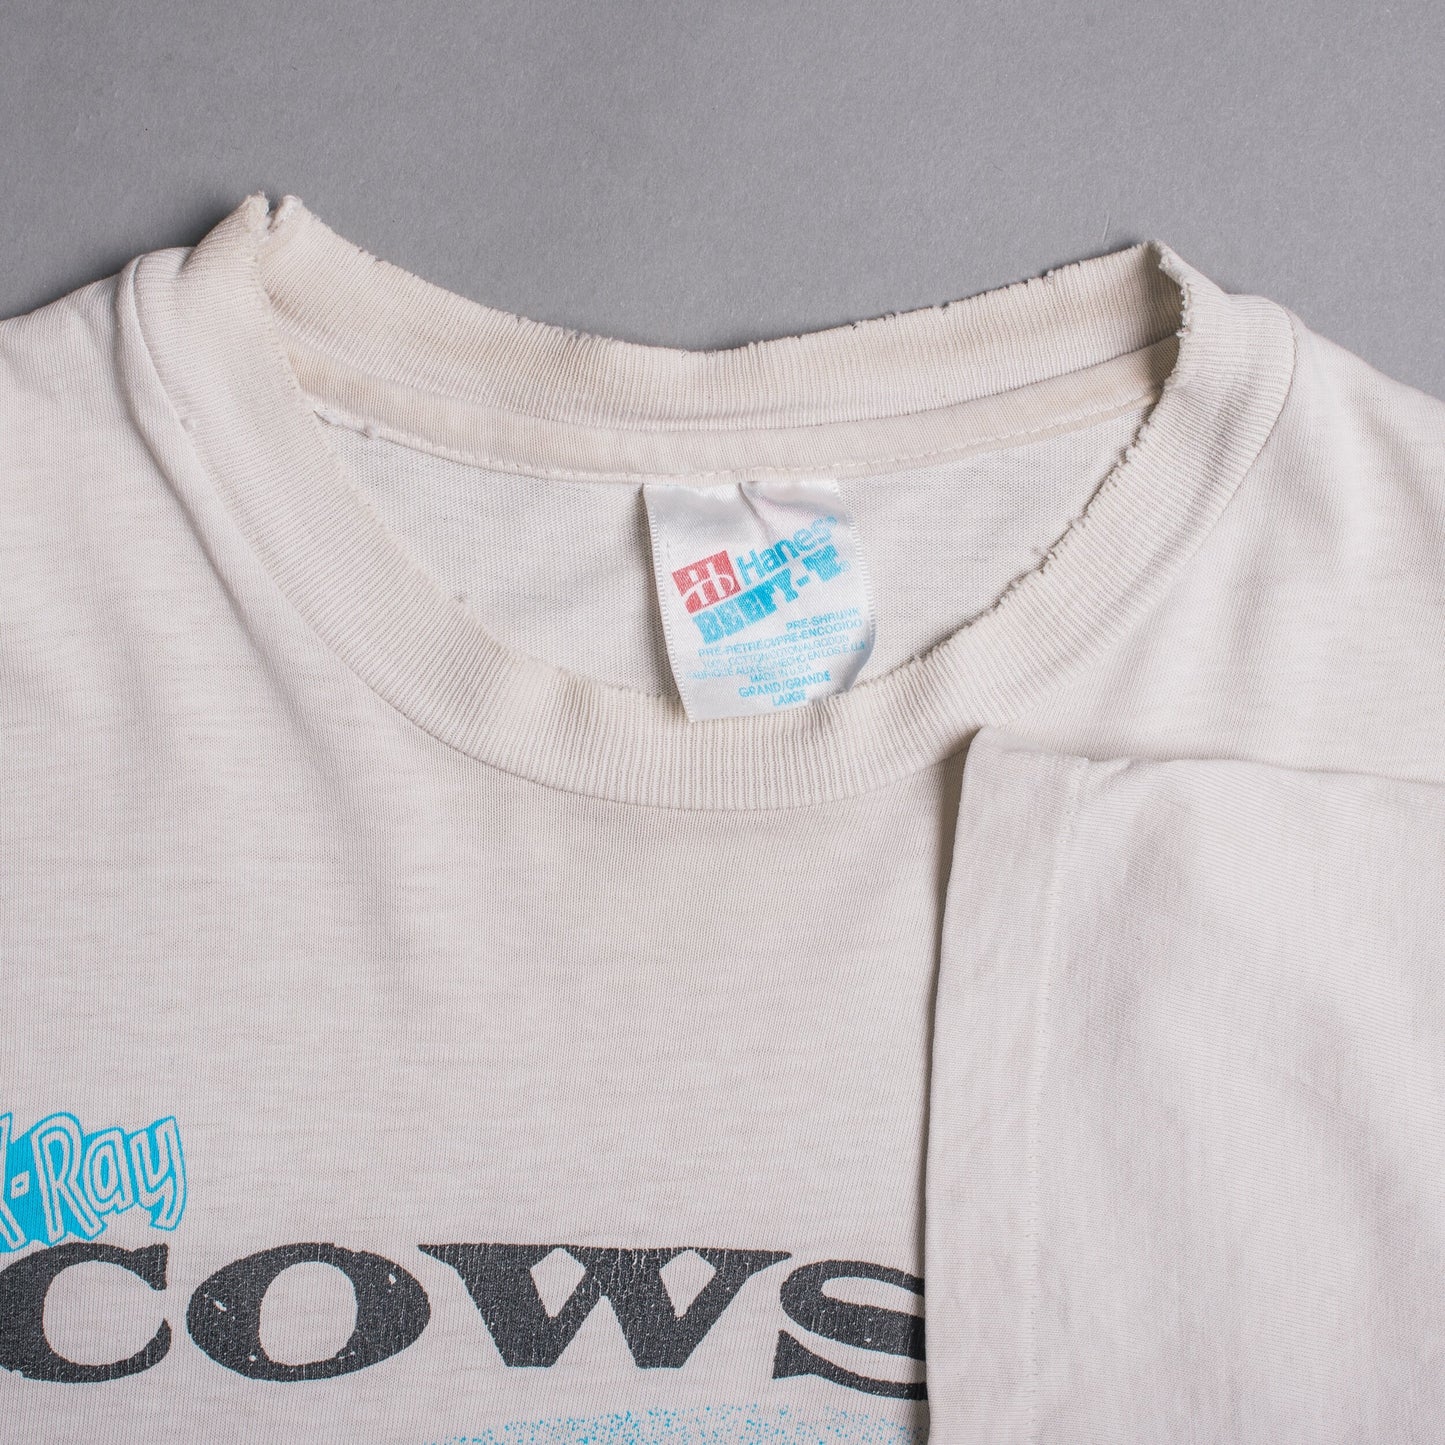 Vintage 90’s Cows X-Ray T-Shirt